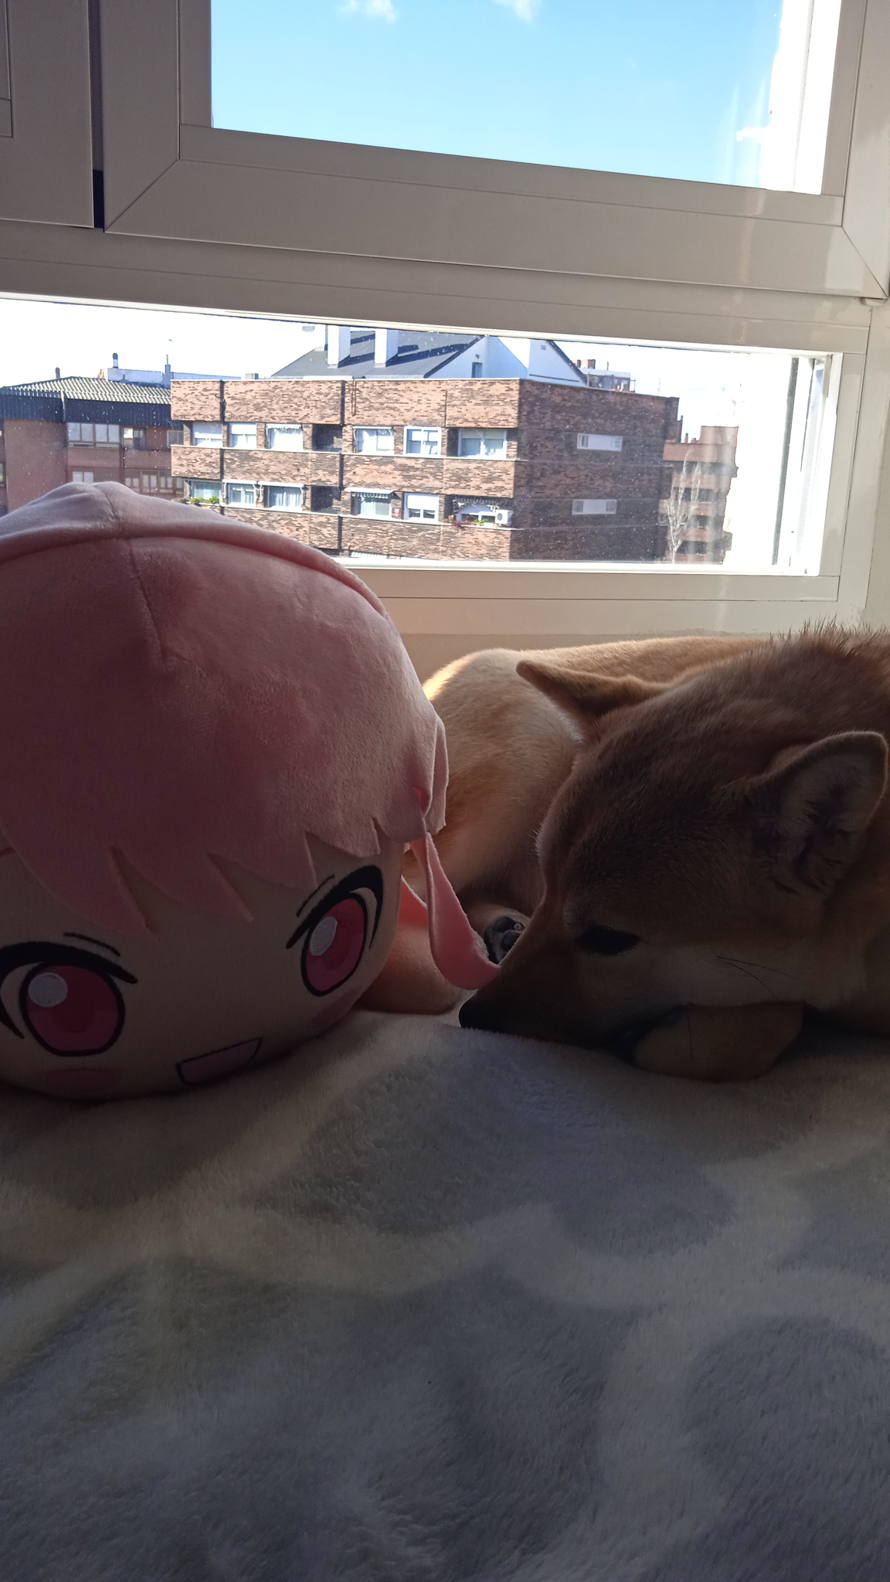 After a few days, my Aya nesoberi arrived!  It looks like my dog likes her! 
I got another pasupare...